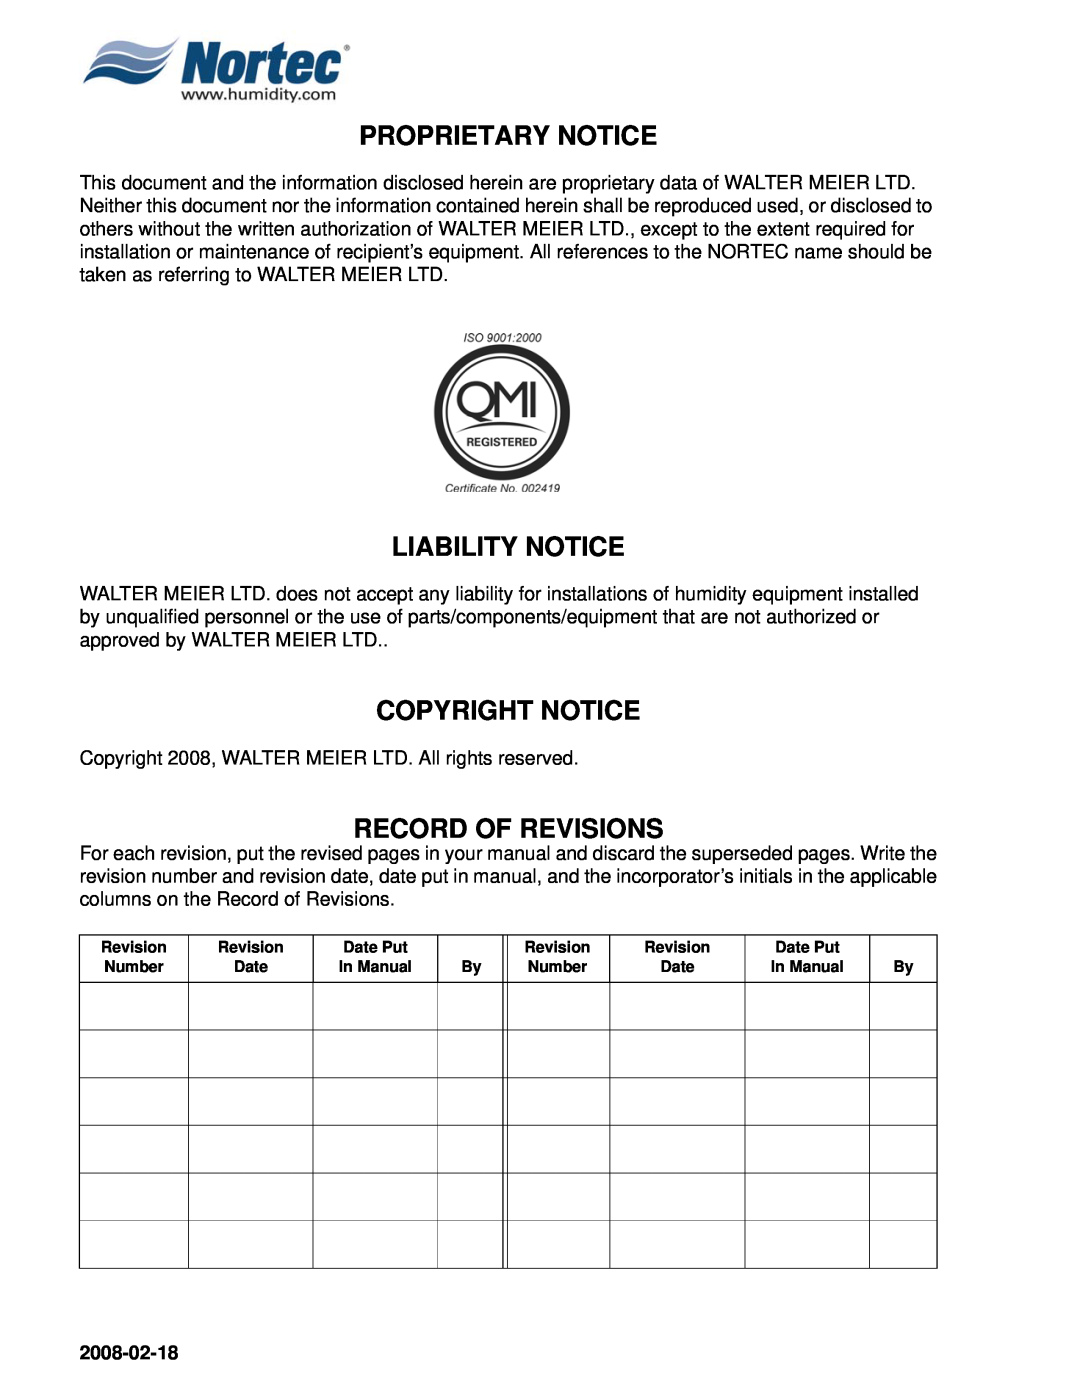 Nortec Industries NHRS Series Proprietary Notice, Liability Notice, Copyright Notice, Record Of Revisions, 2008-02-18 